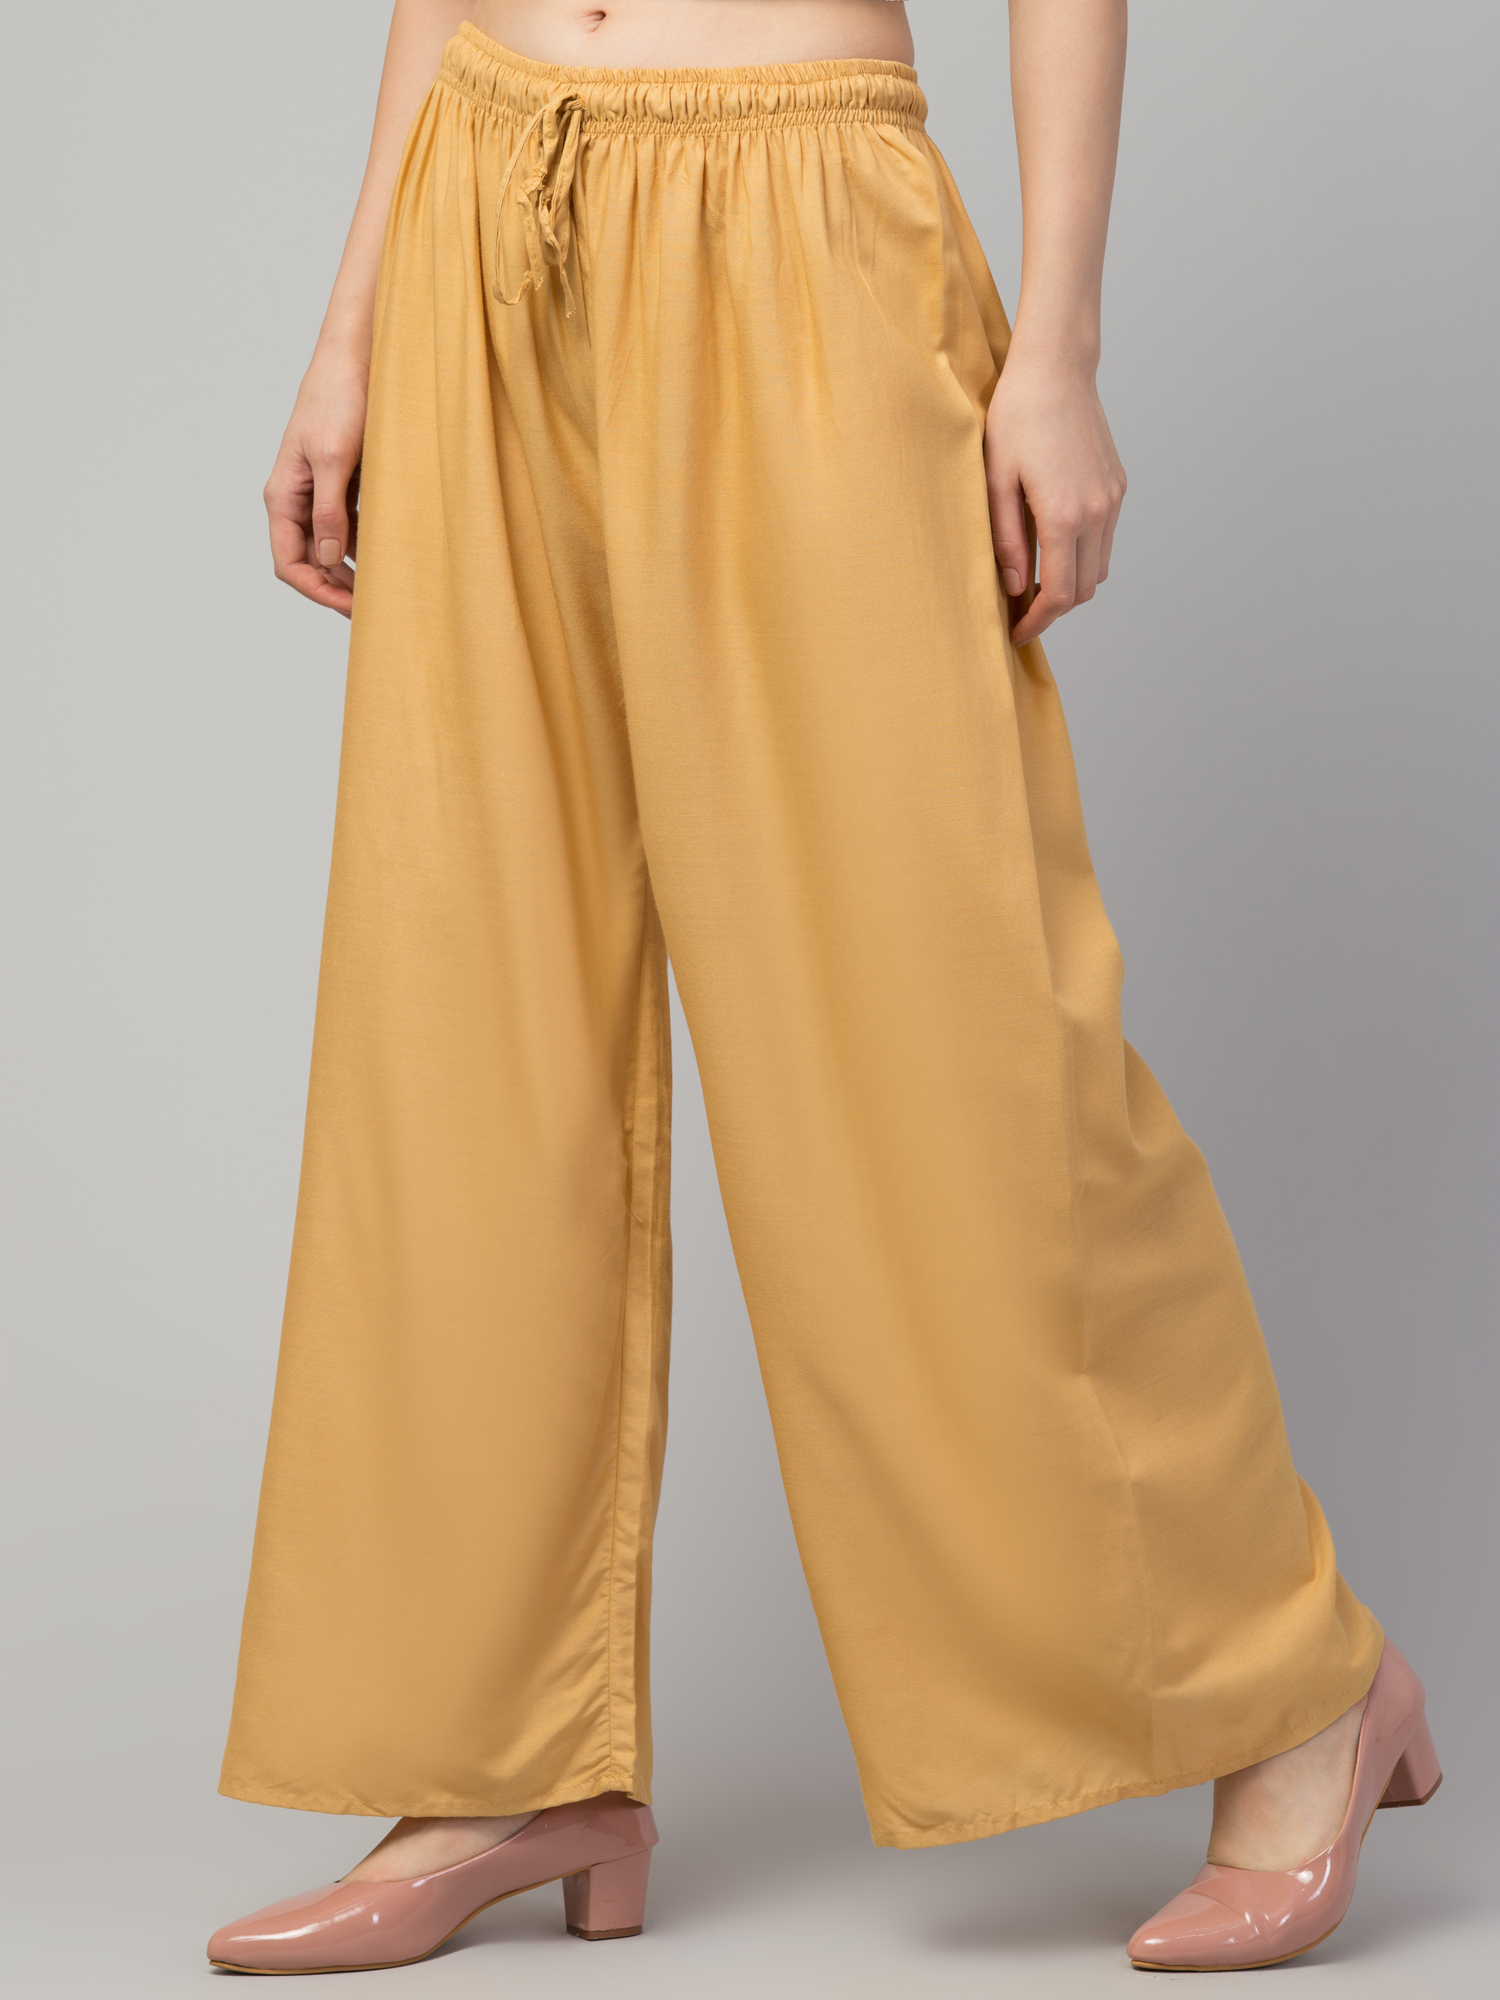 Arizona Gold Floral Wide Leg Pants - band of the free